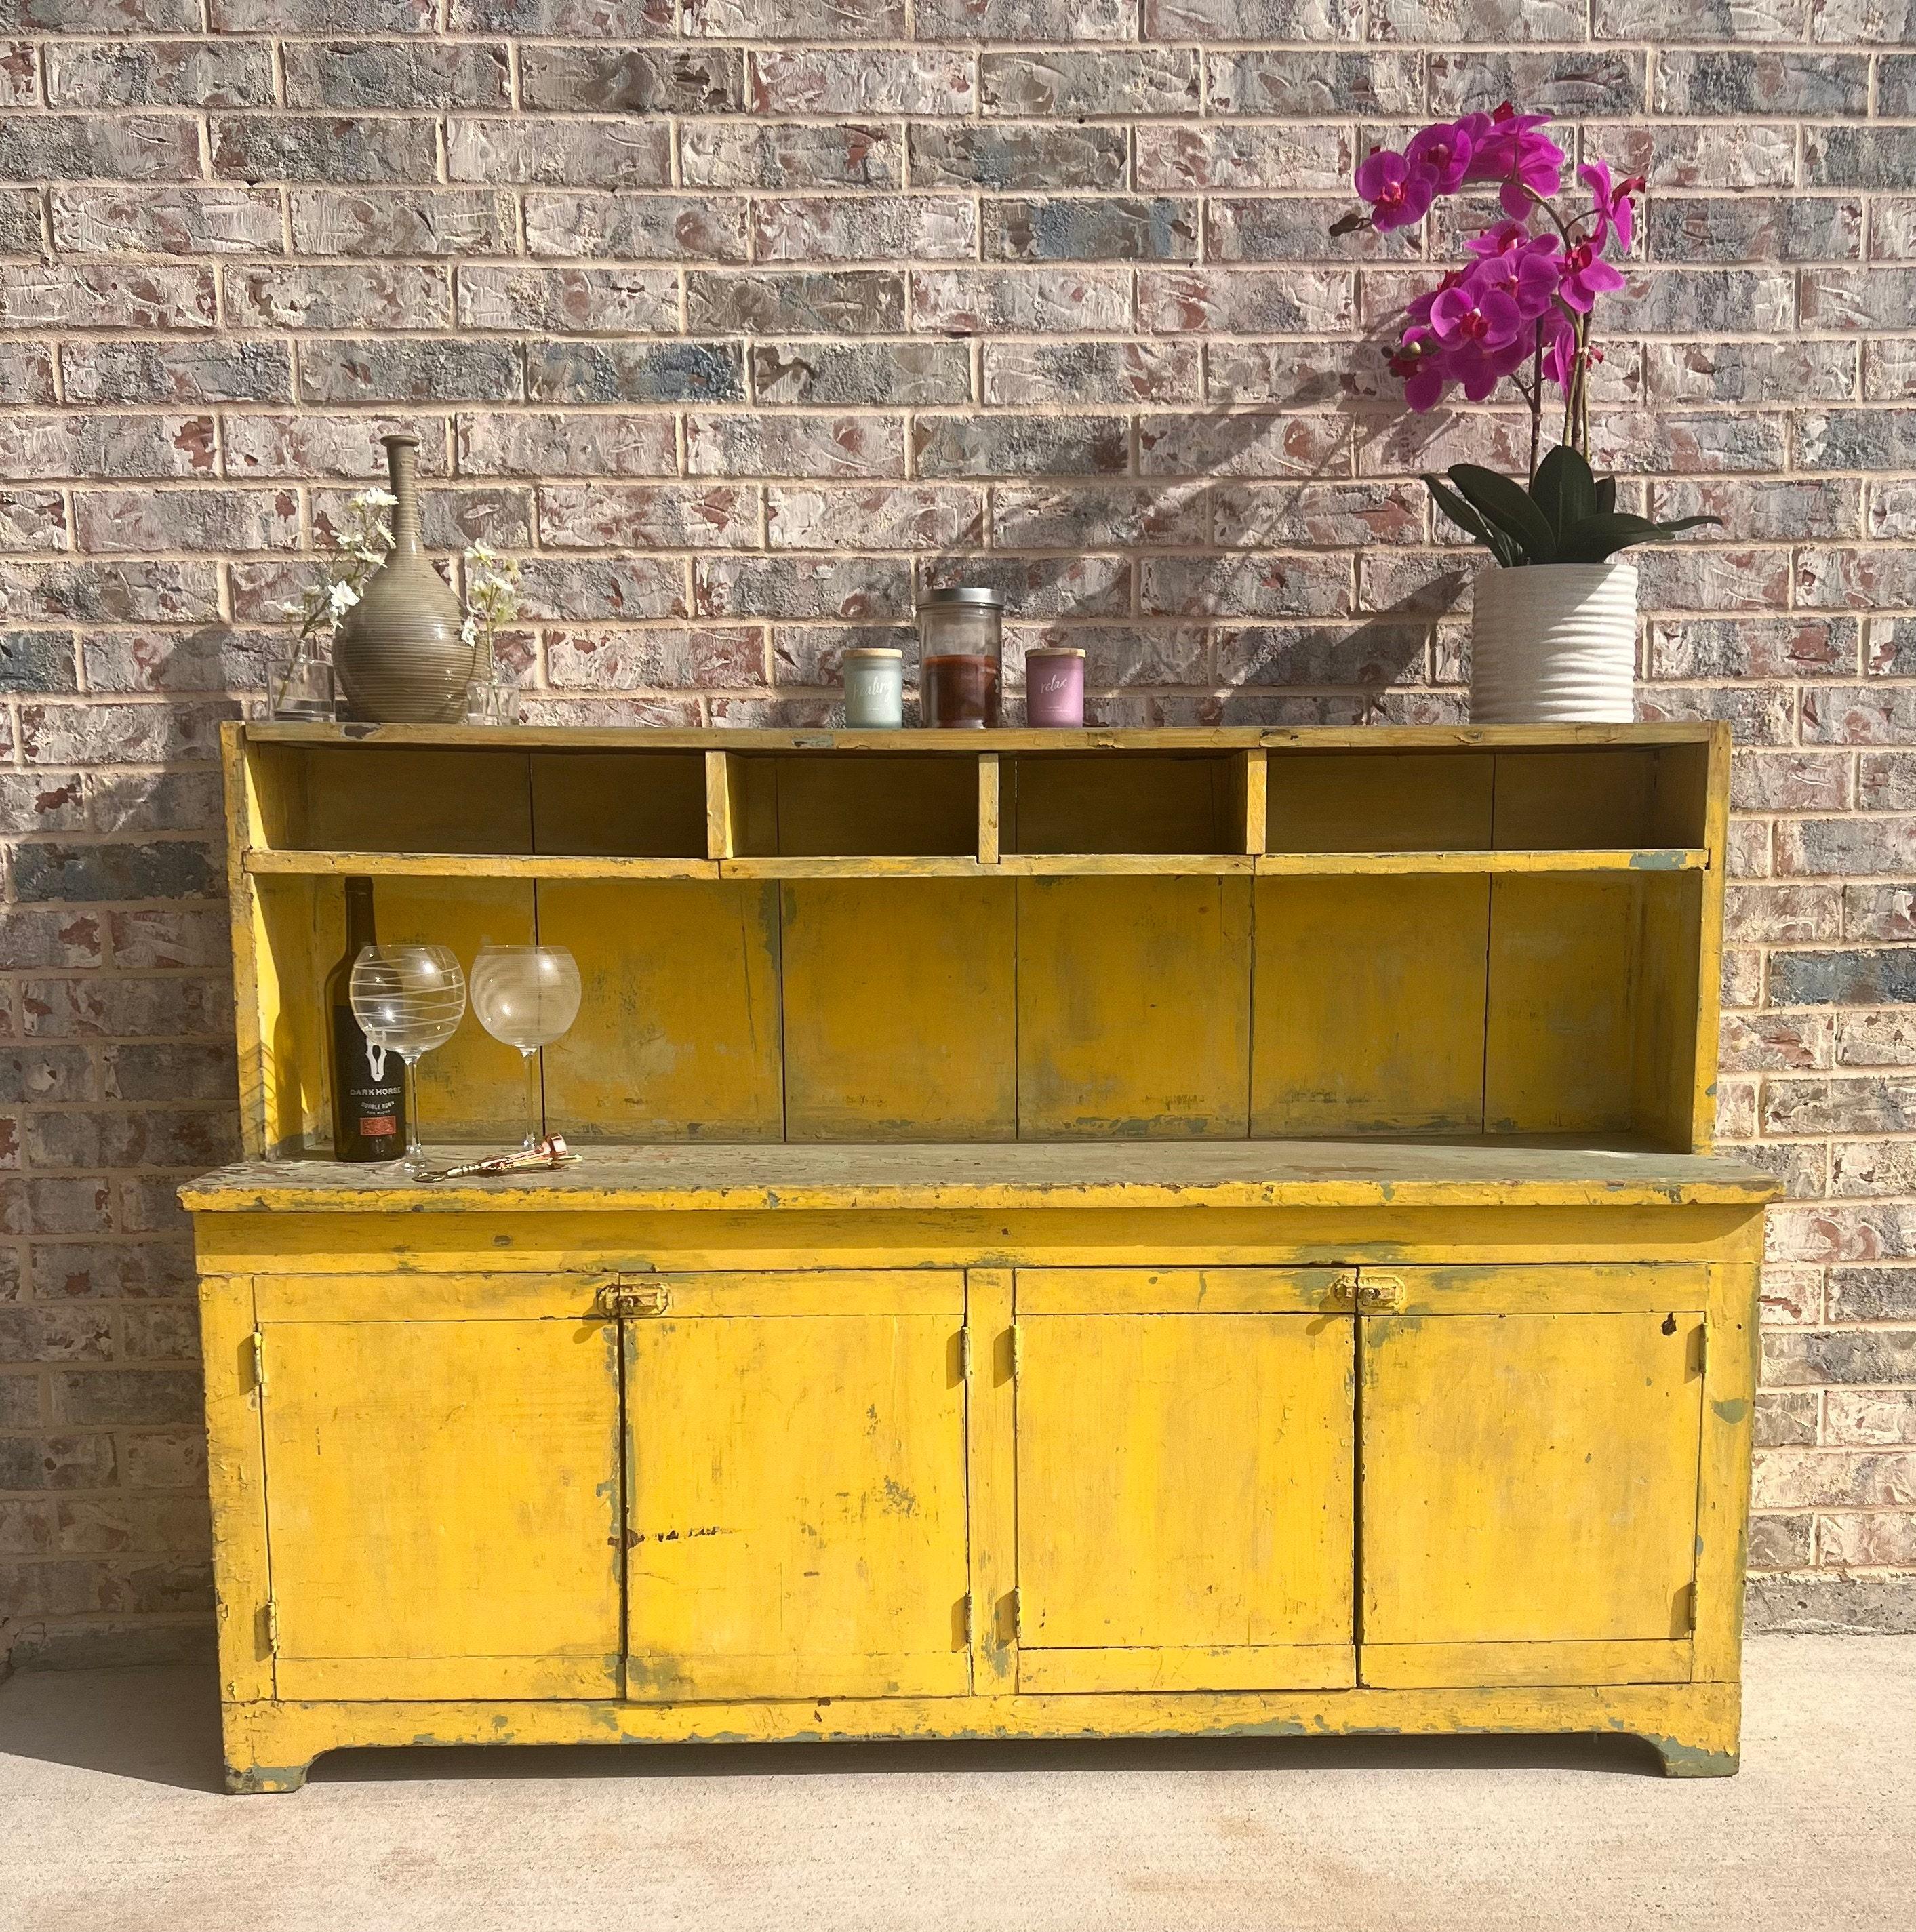 A charming rustic antique American country yellow painted pine bucket bench / kitchen cupboard that today would serve well as a farmhouse sideboard server or breakfast buffet, hall console, patio potters table or work bench, or placed in the foyer